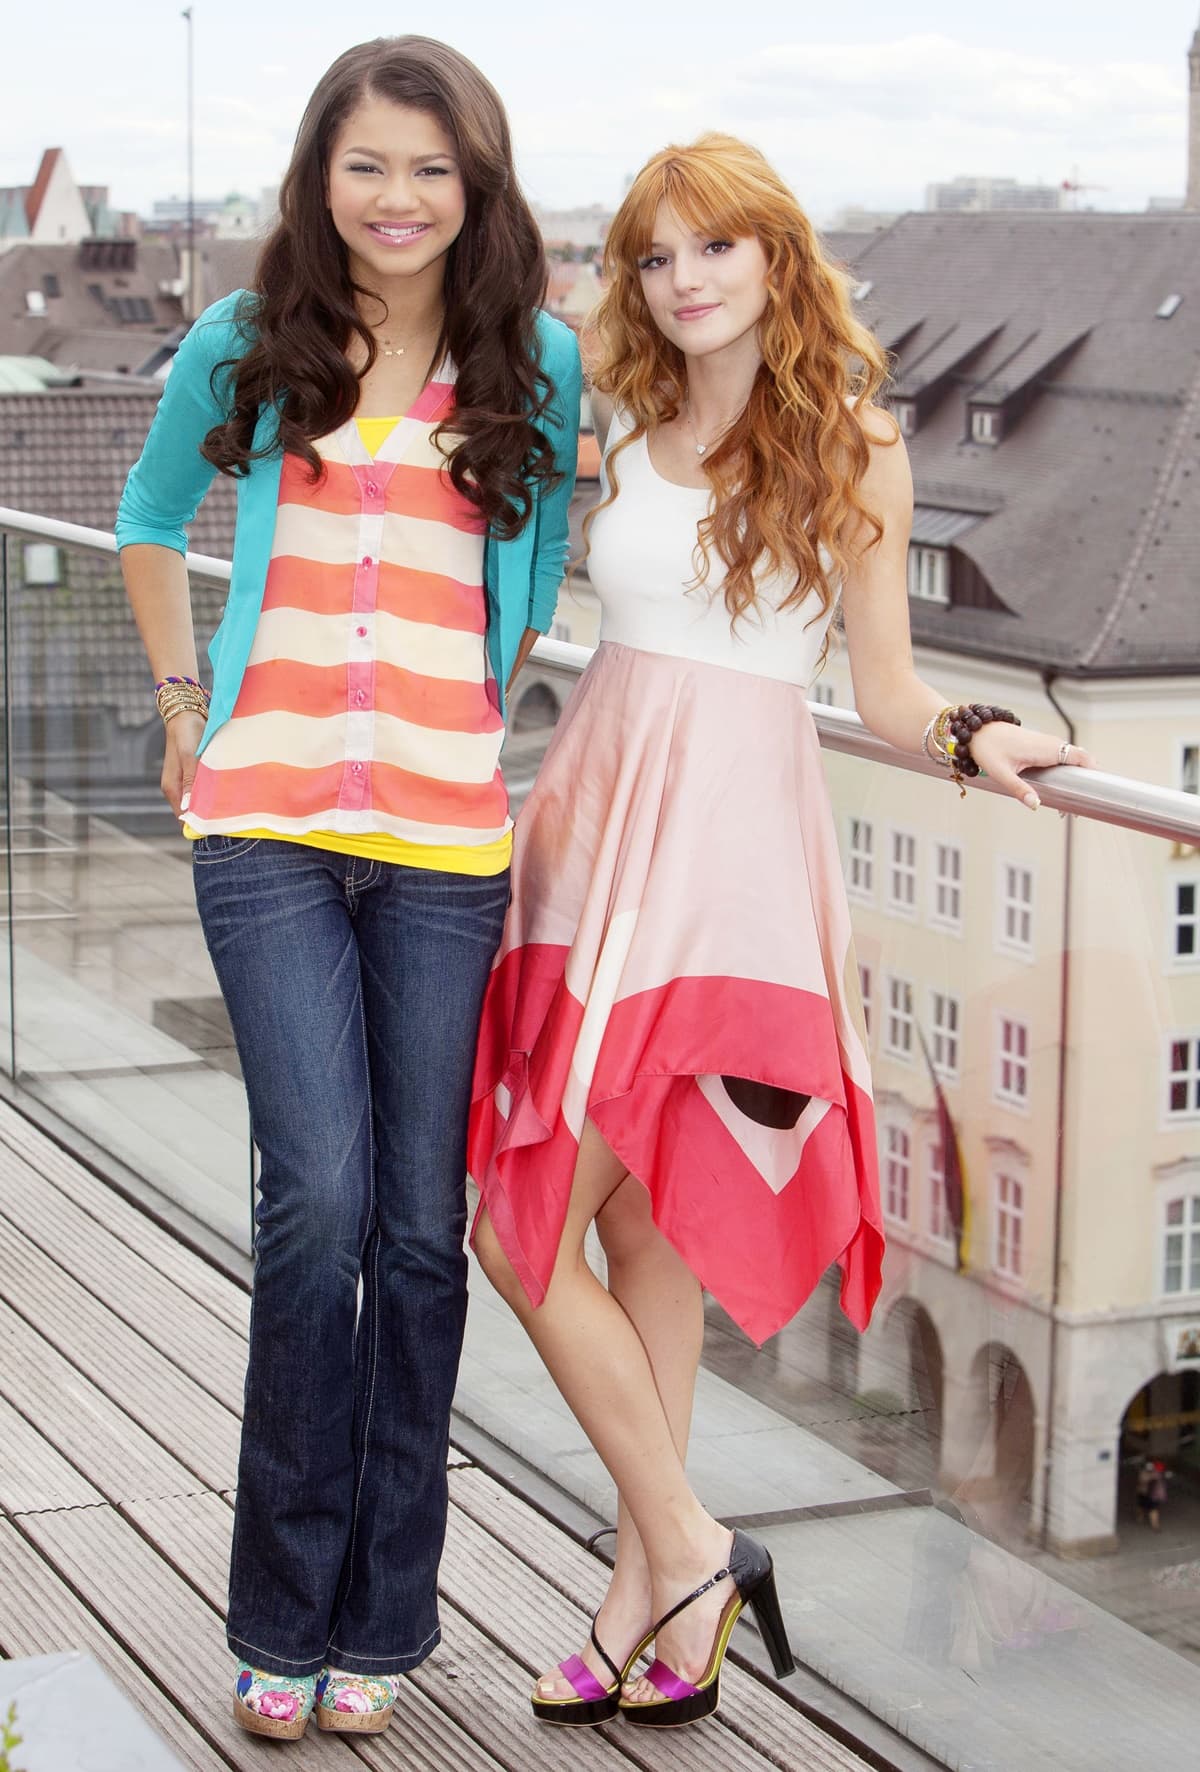 Bella Thorne and Zendaya on a rooftop during a photo call for their hit Disney show, Shake It Up, in Munich